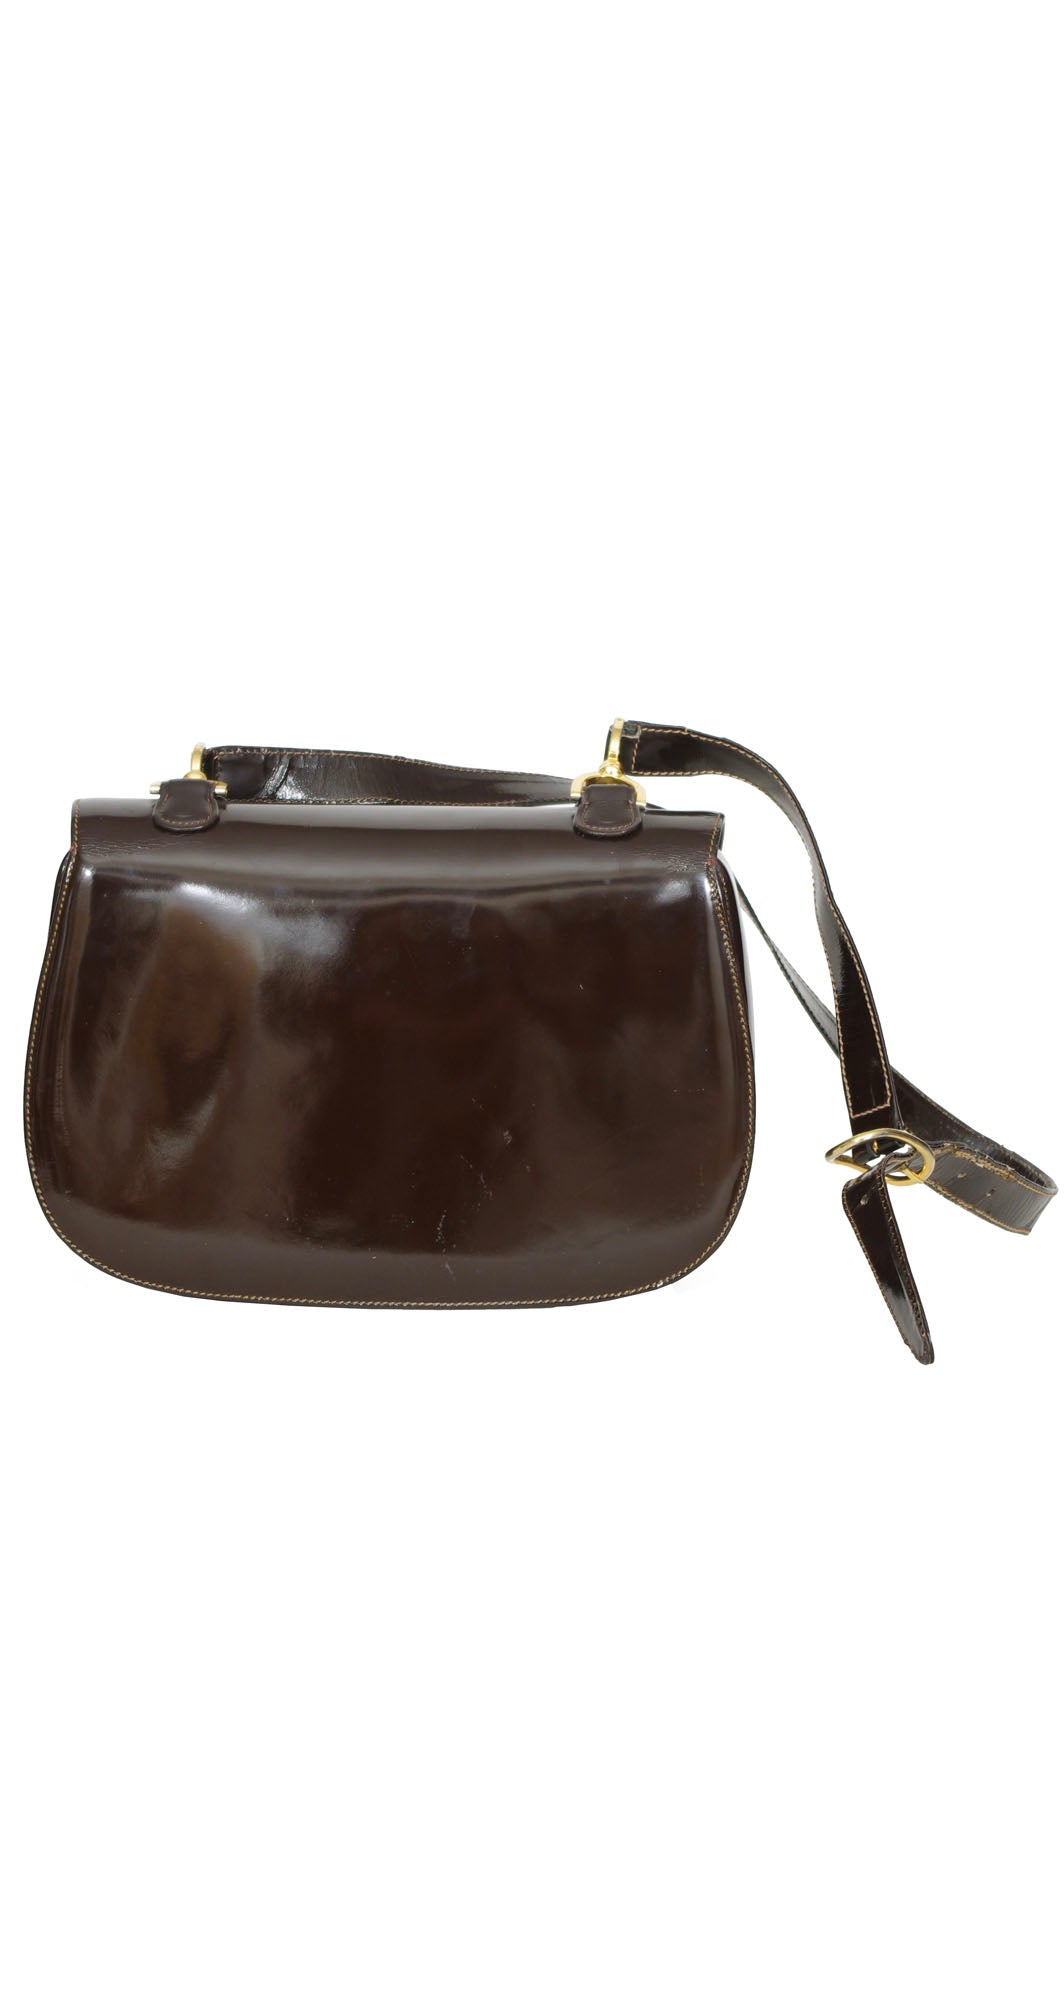 1970s Iconic Bamboo Clasp Brown Patent Leather Shoulder Bag